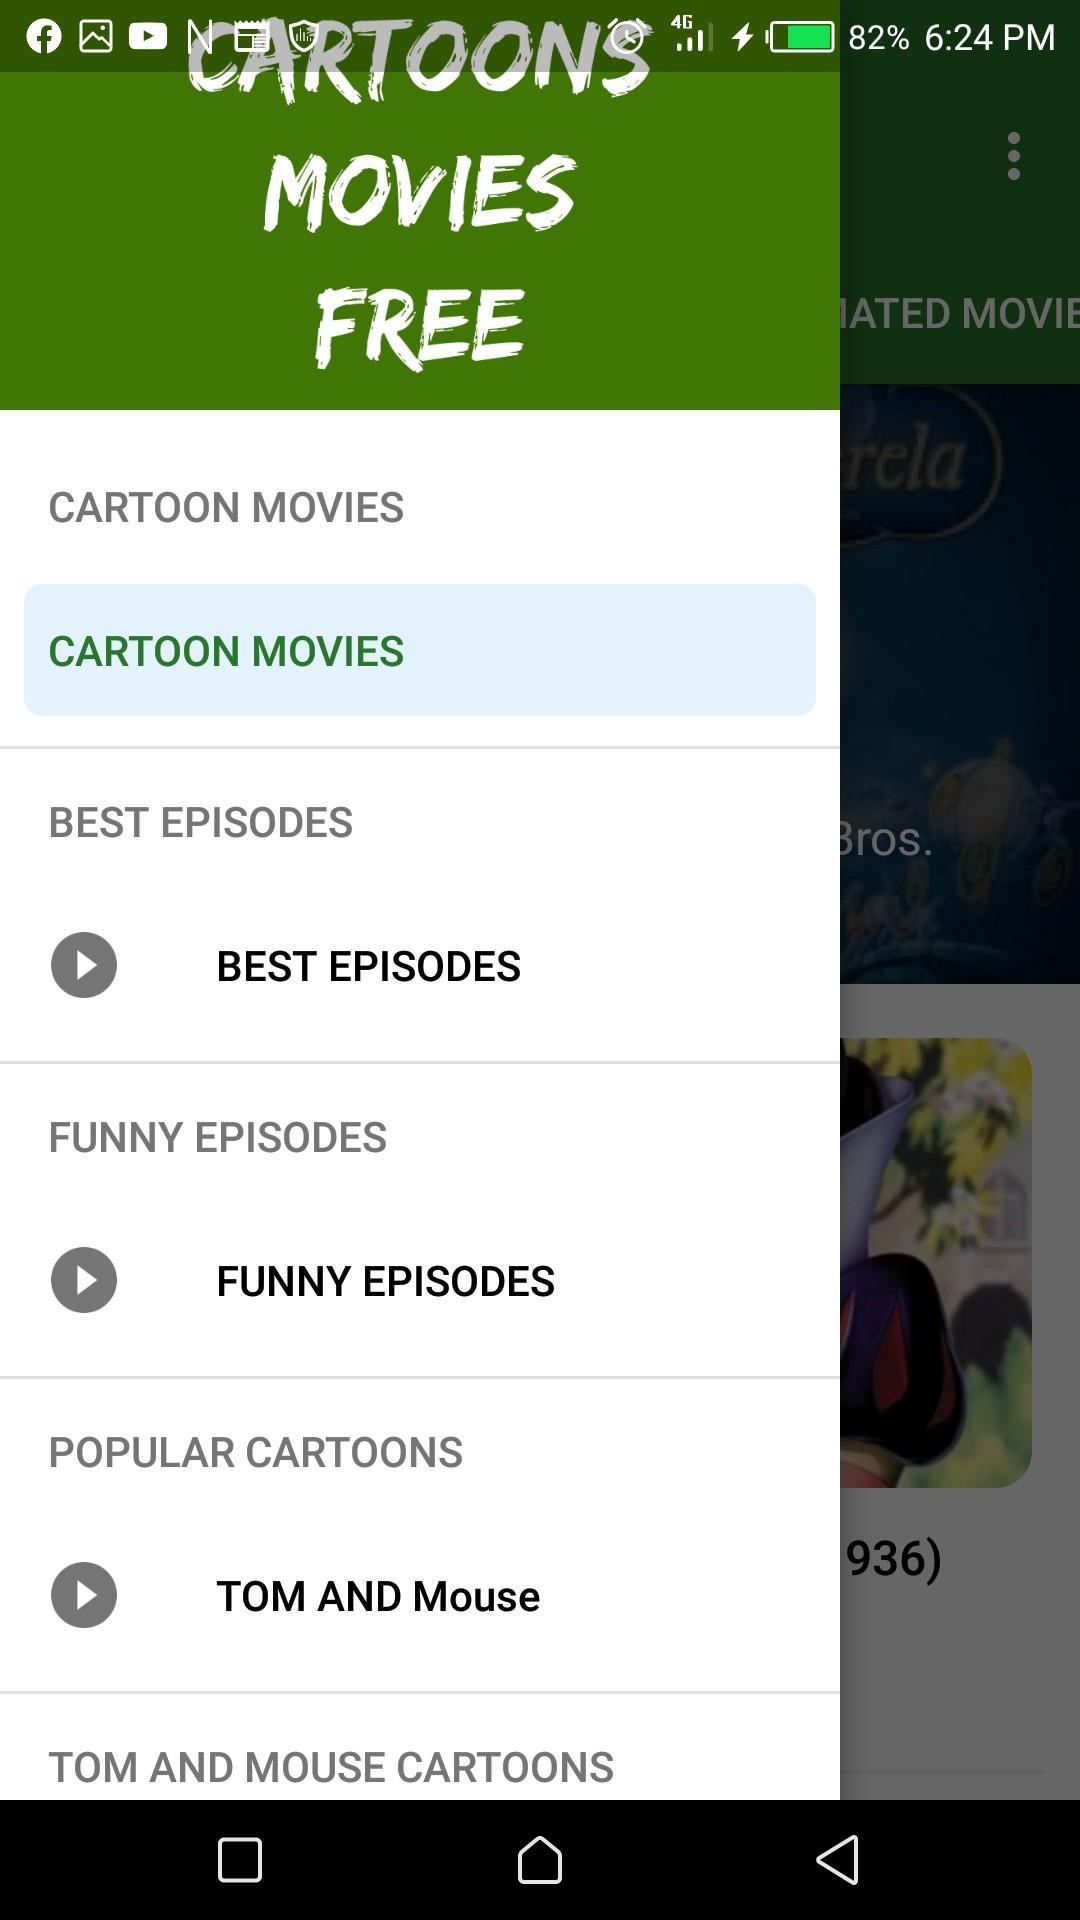 Cartoon Movies free - Watch free cartoons for Android - APK Download